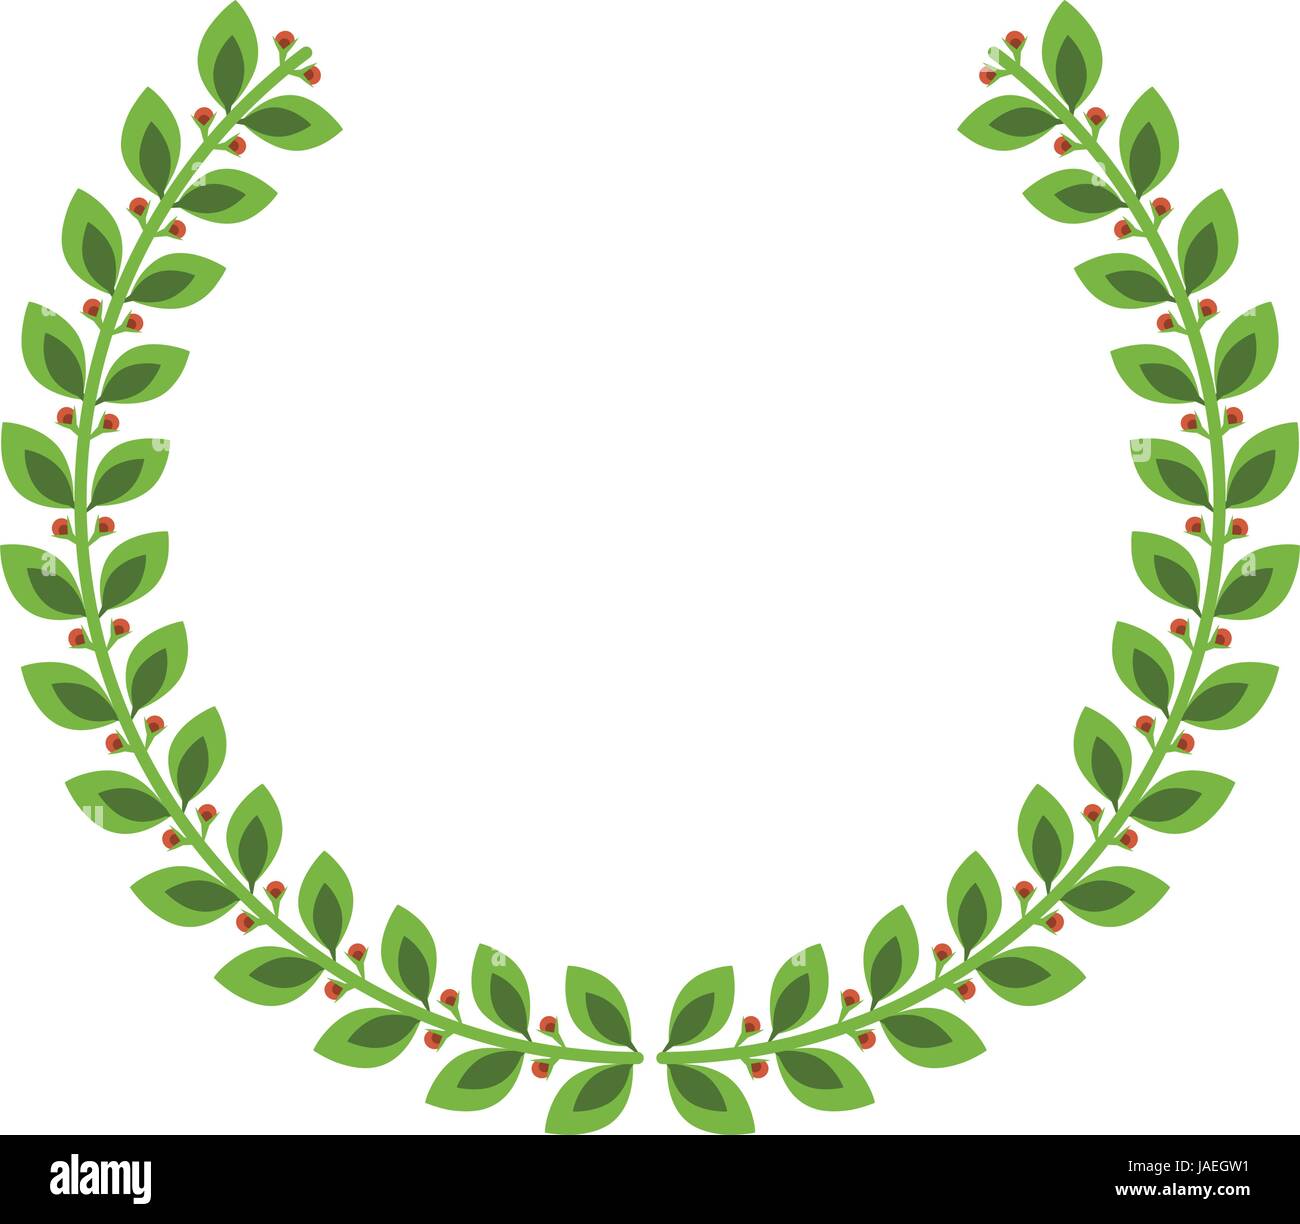 Laurel Crown High Resolution Stock Photography and Images - Alamy